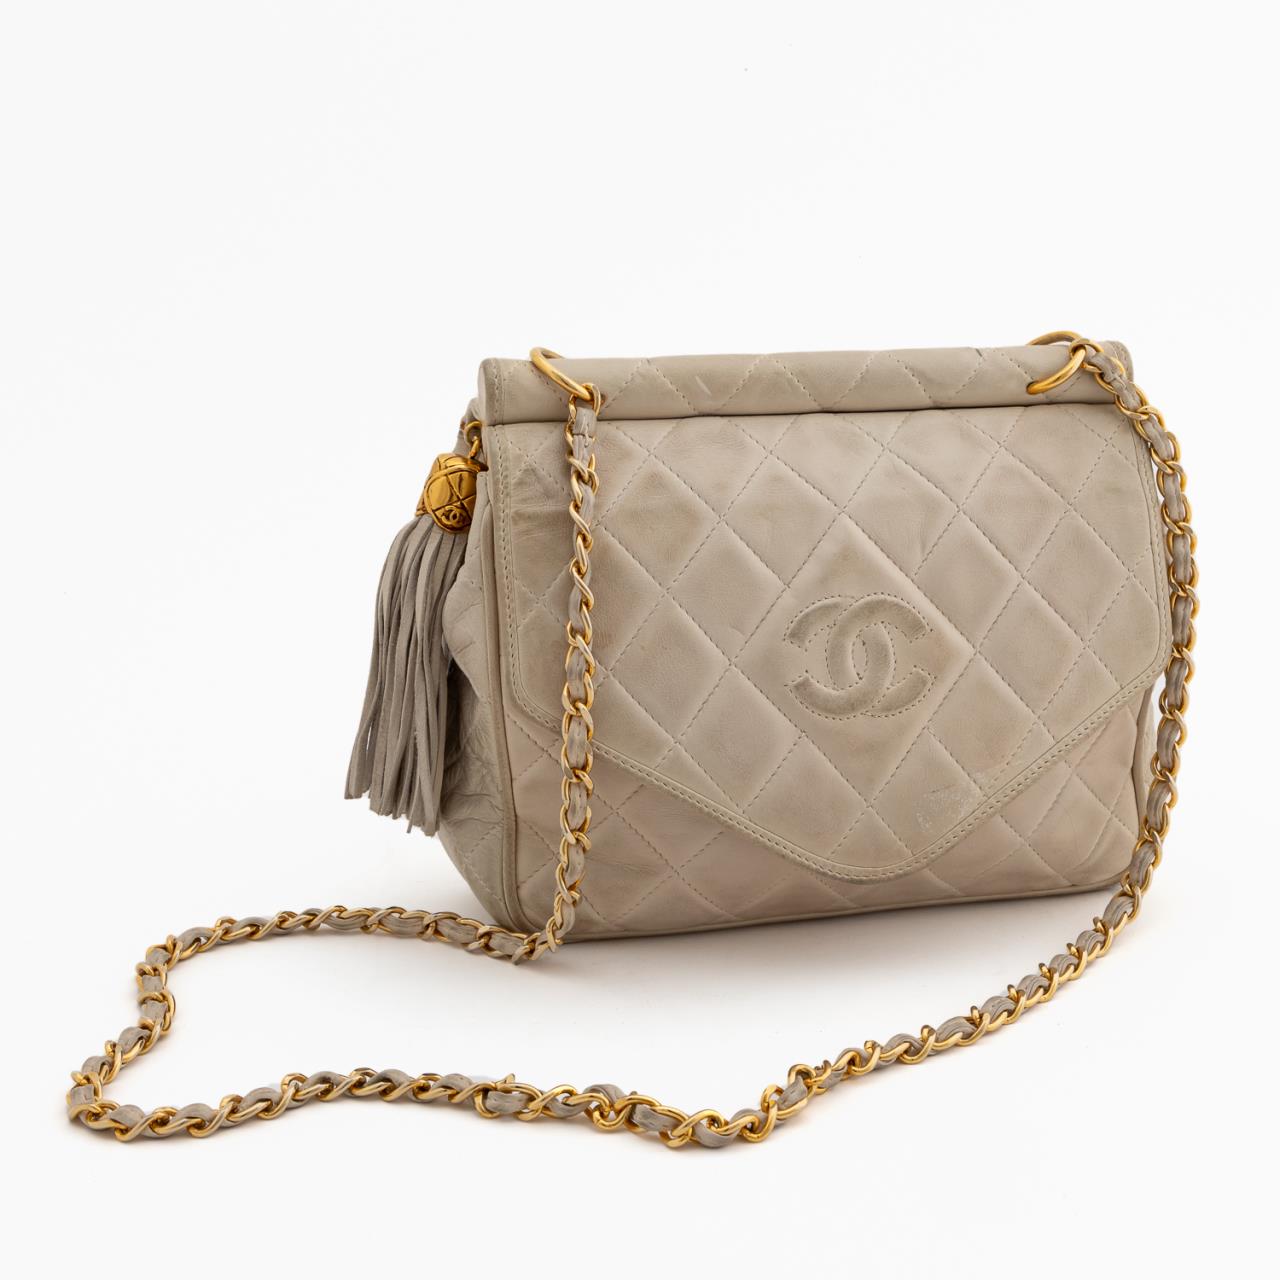 CHANEL CREAM LEATHER QUILTED FLAP 358ec4